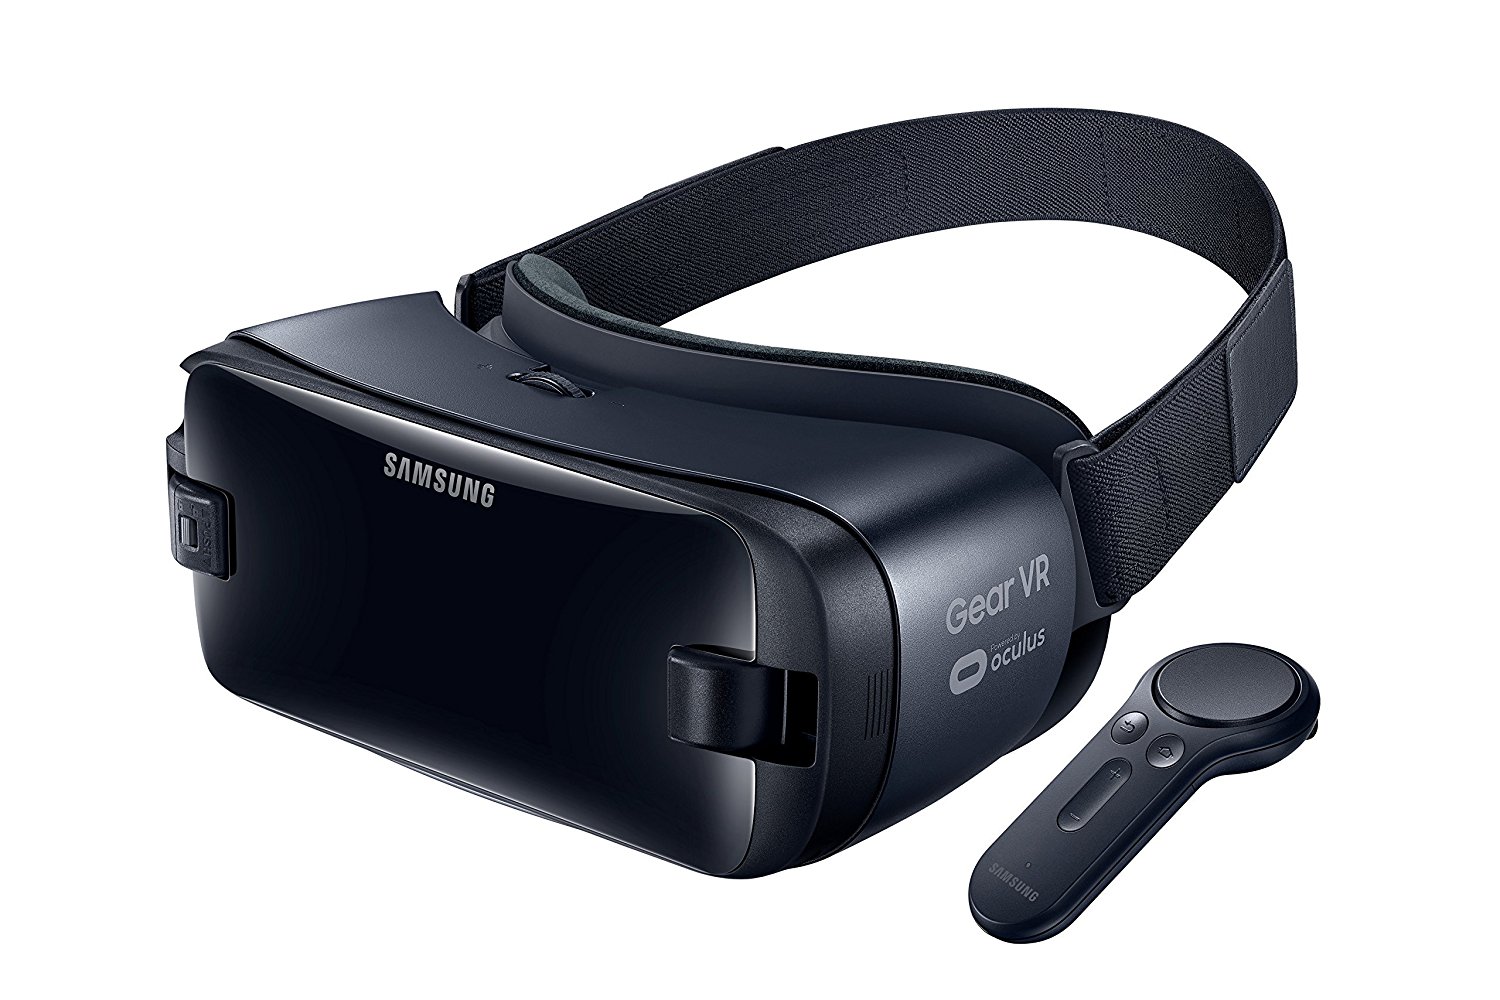 Deals : Samsung Gear VR now available for $99.99 1